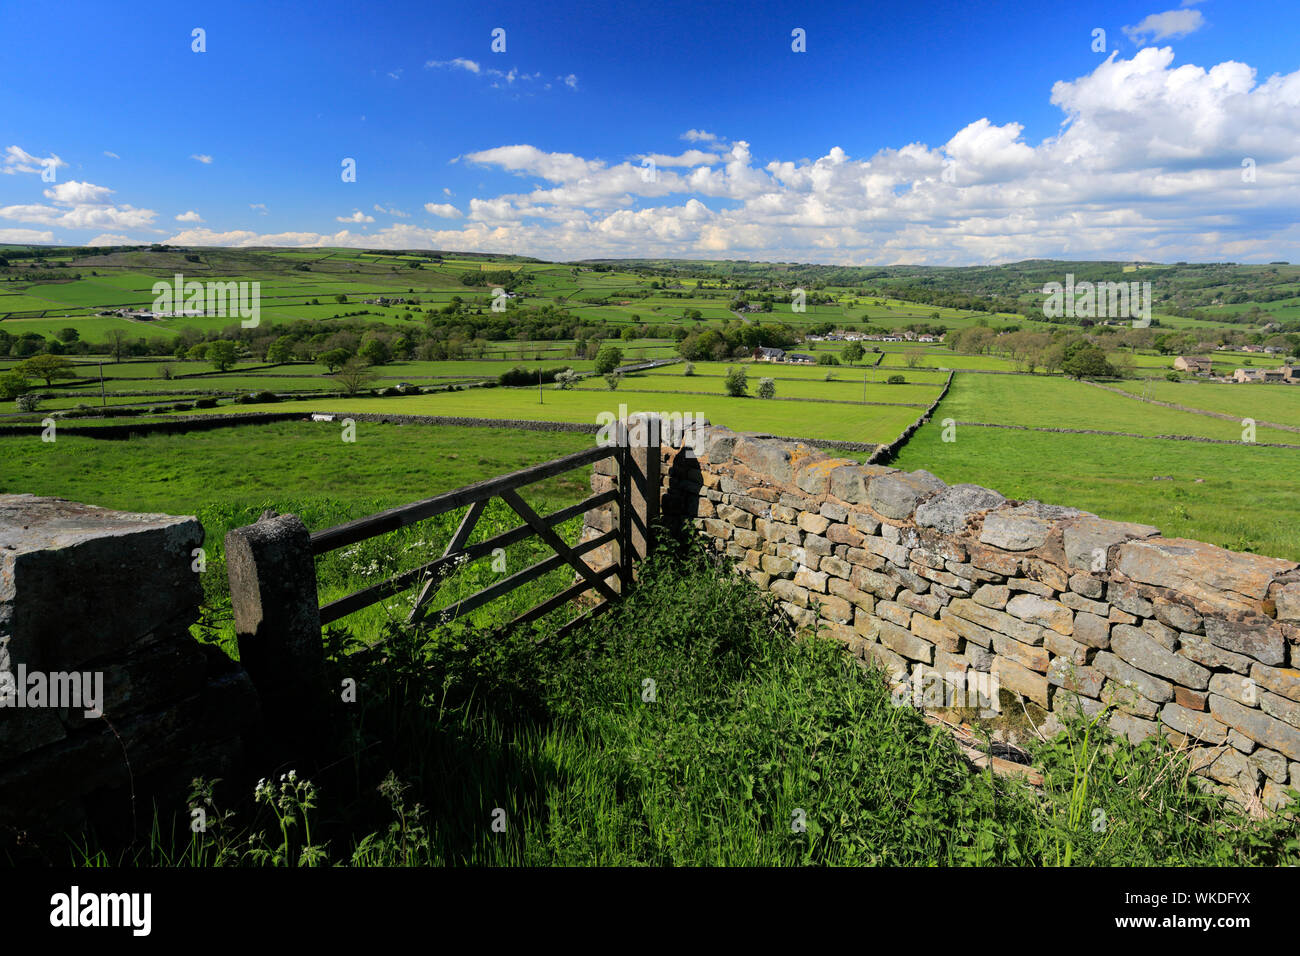 View over the River Nidd valley near Summerbridge village, Nidderdale, Harrogate district, North Yorkshire, England. Stock Photo